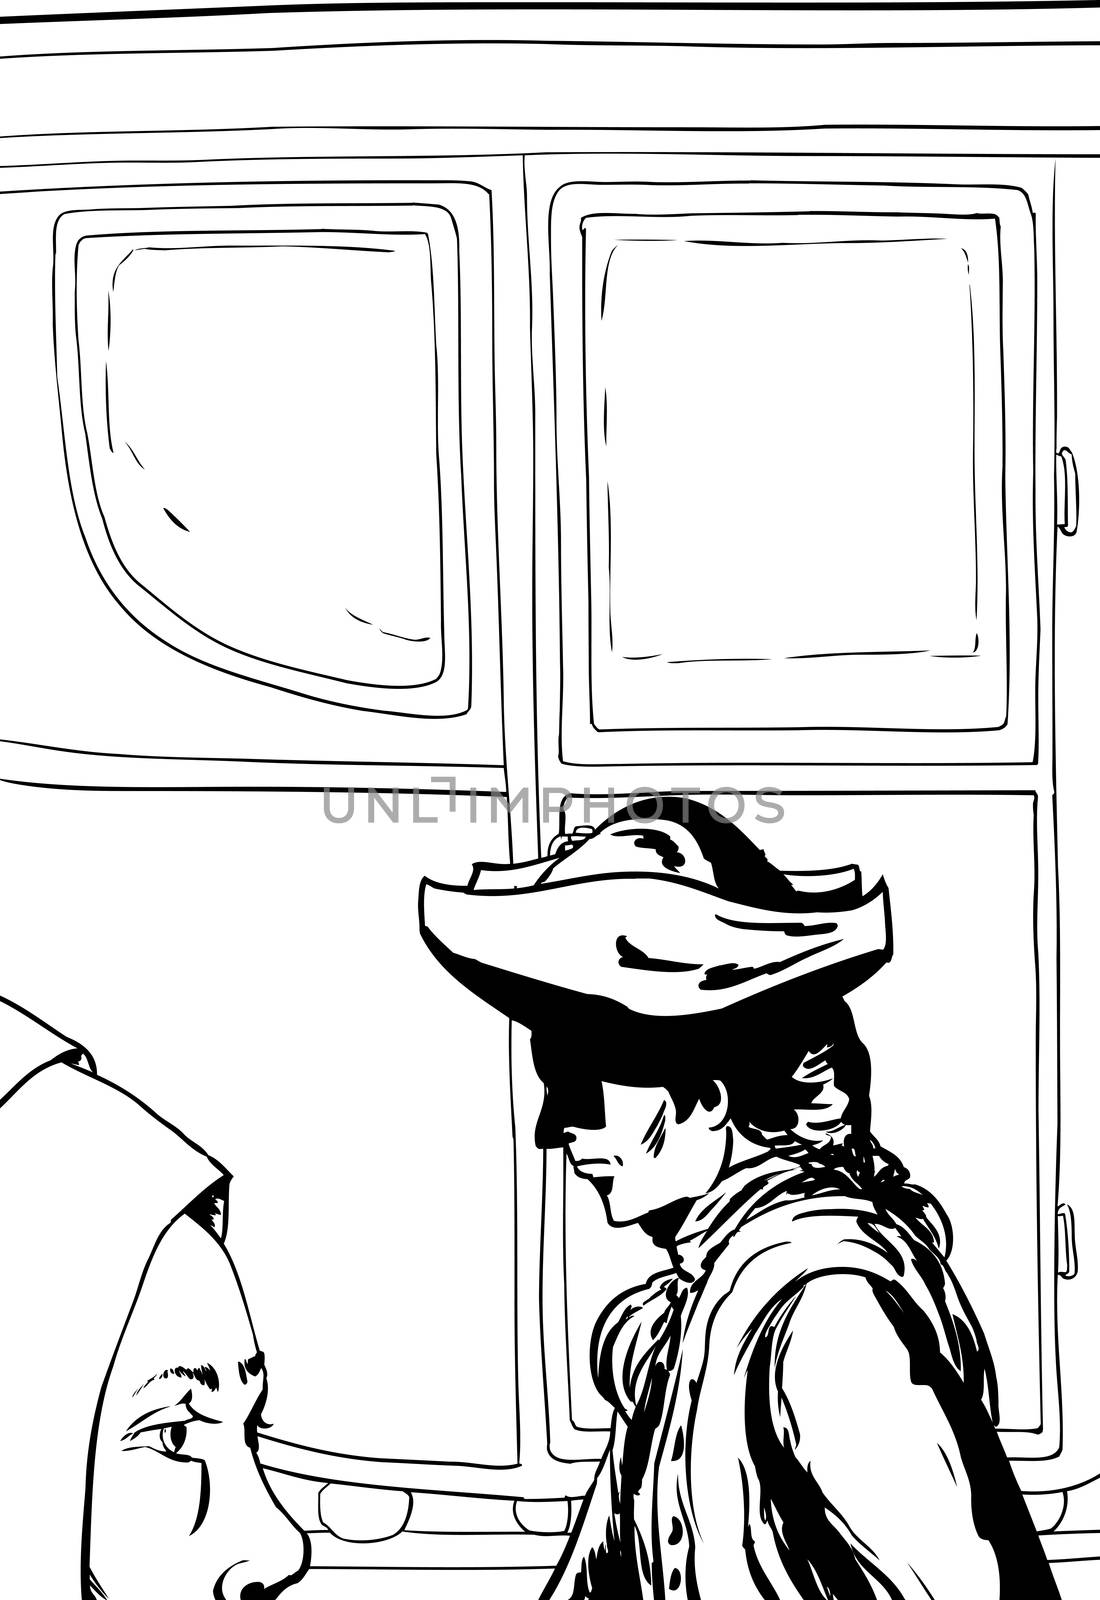 Outlined man and woman walking past empty carriage by TheBlackRhino